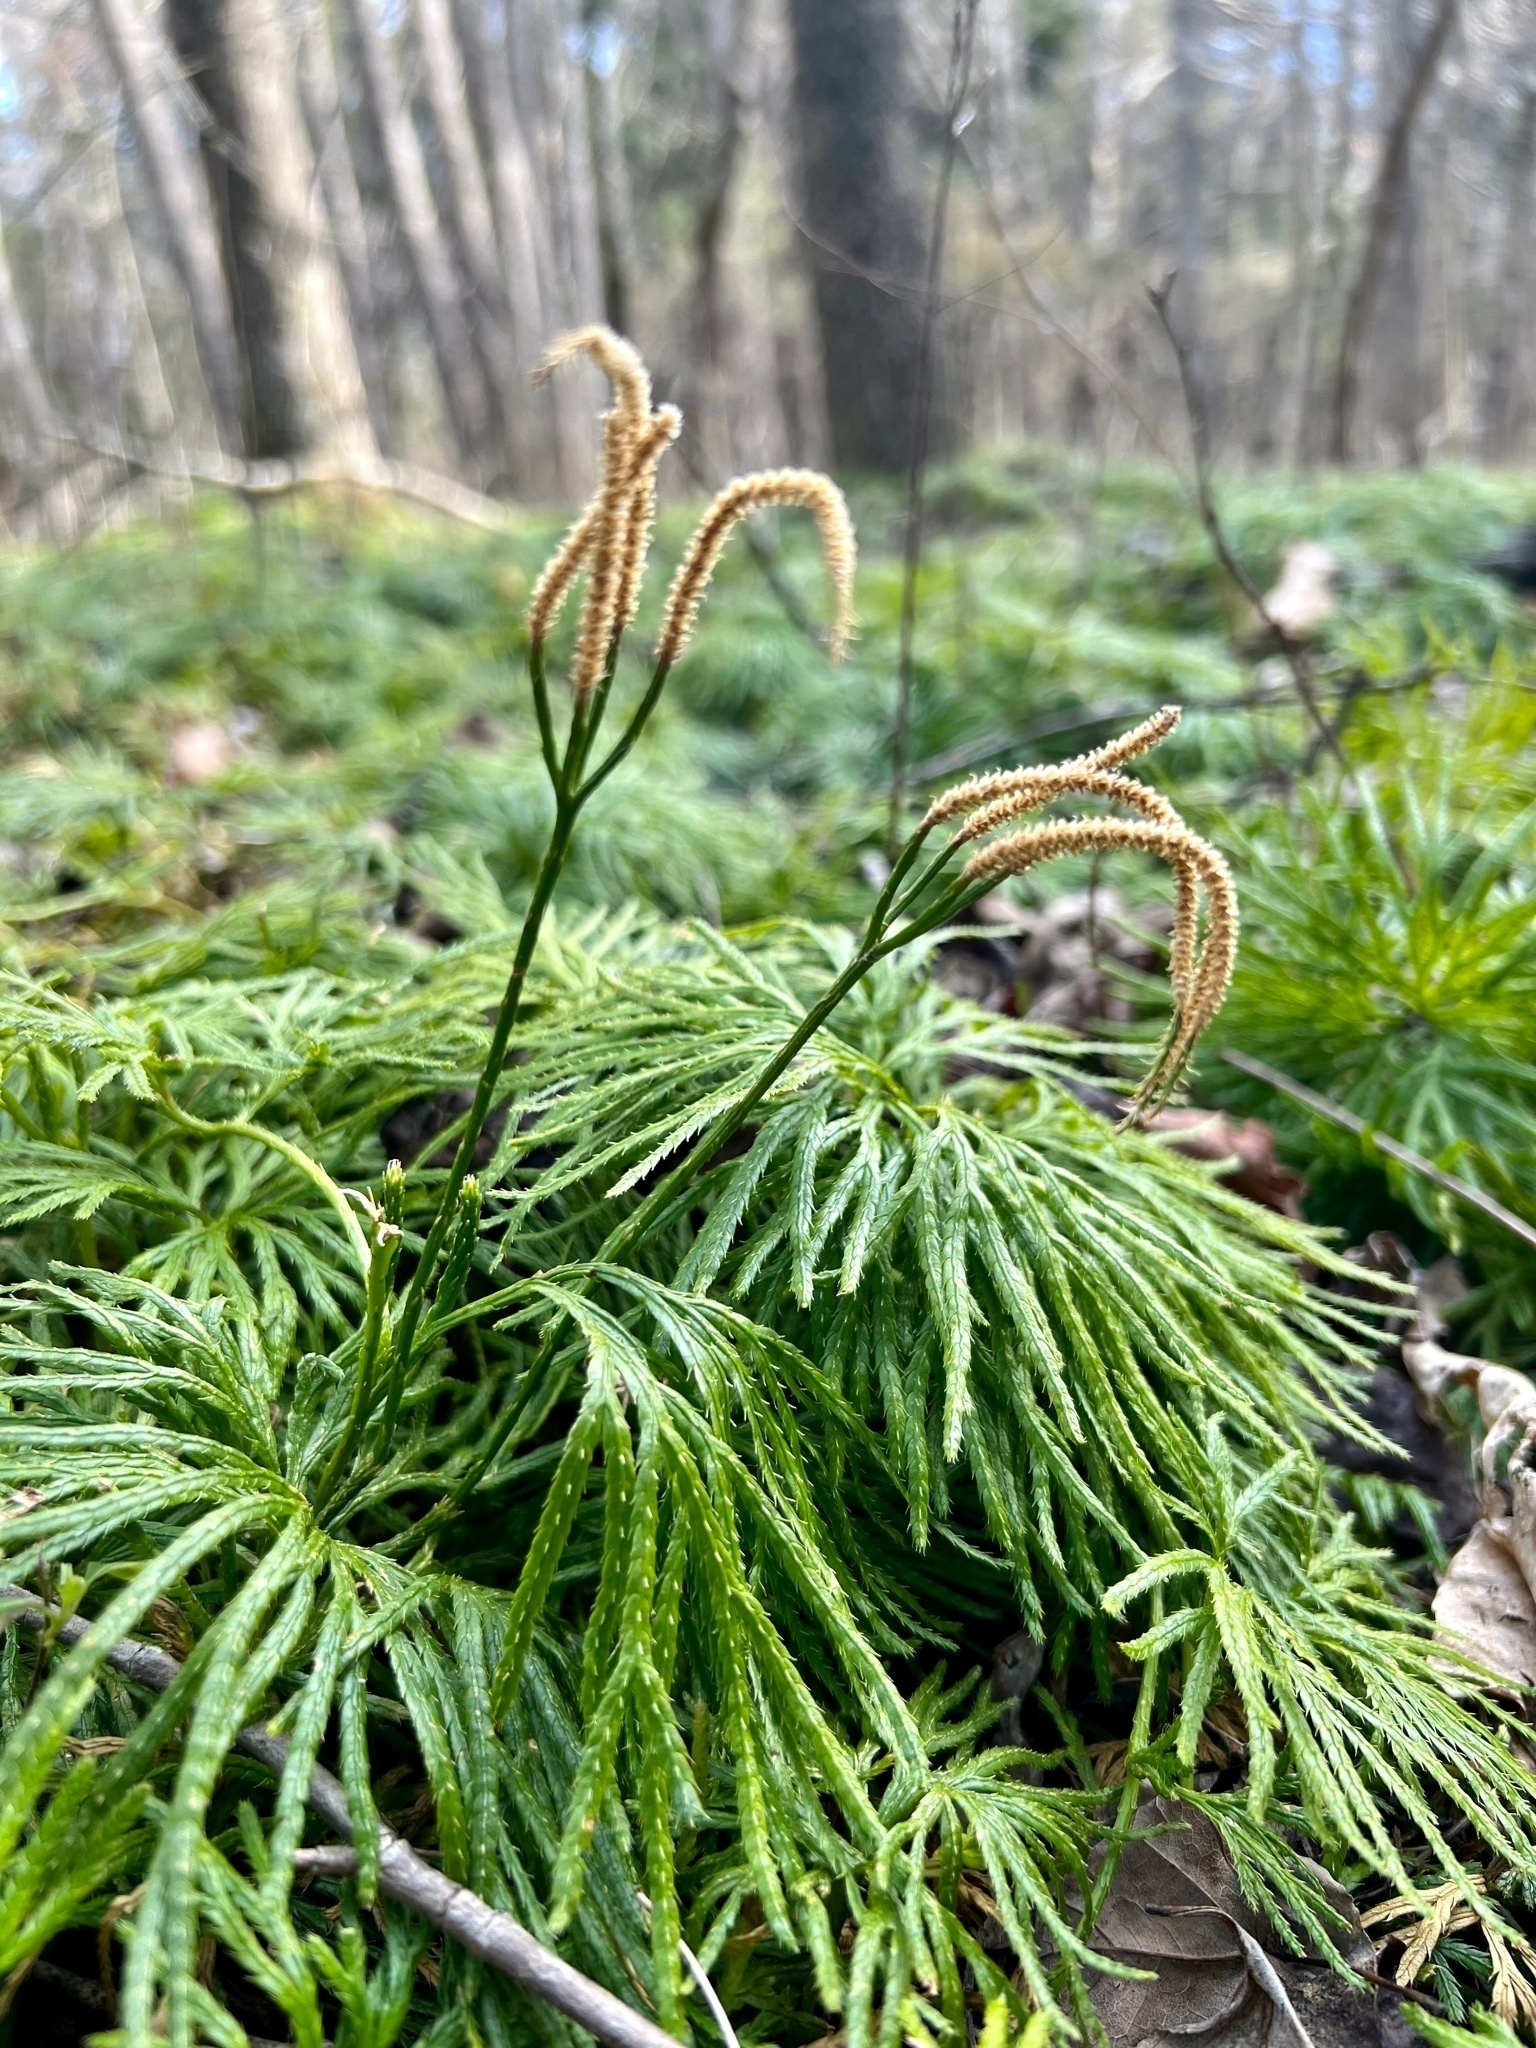 An evergreen, ground cover resembling cedar branches covers the winter forest floor. Two stems of yellowish strands are growing up from one of the plants.